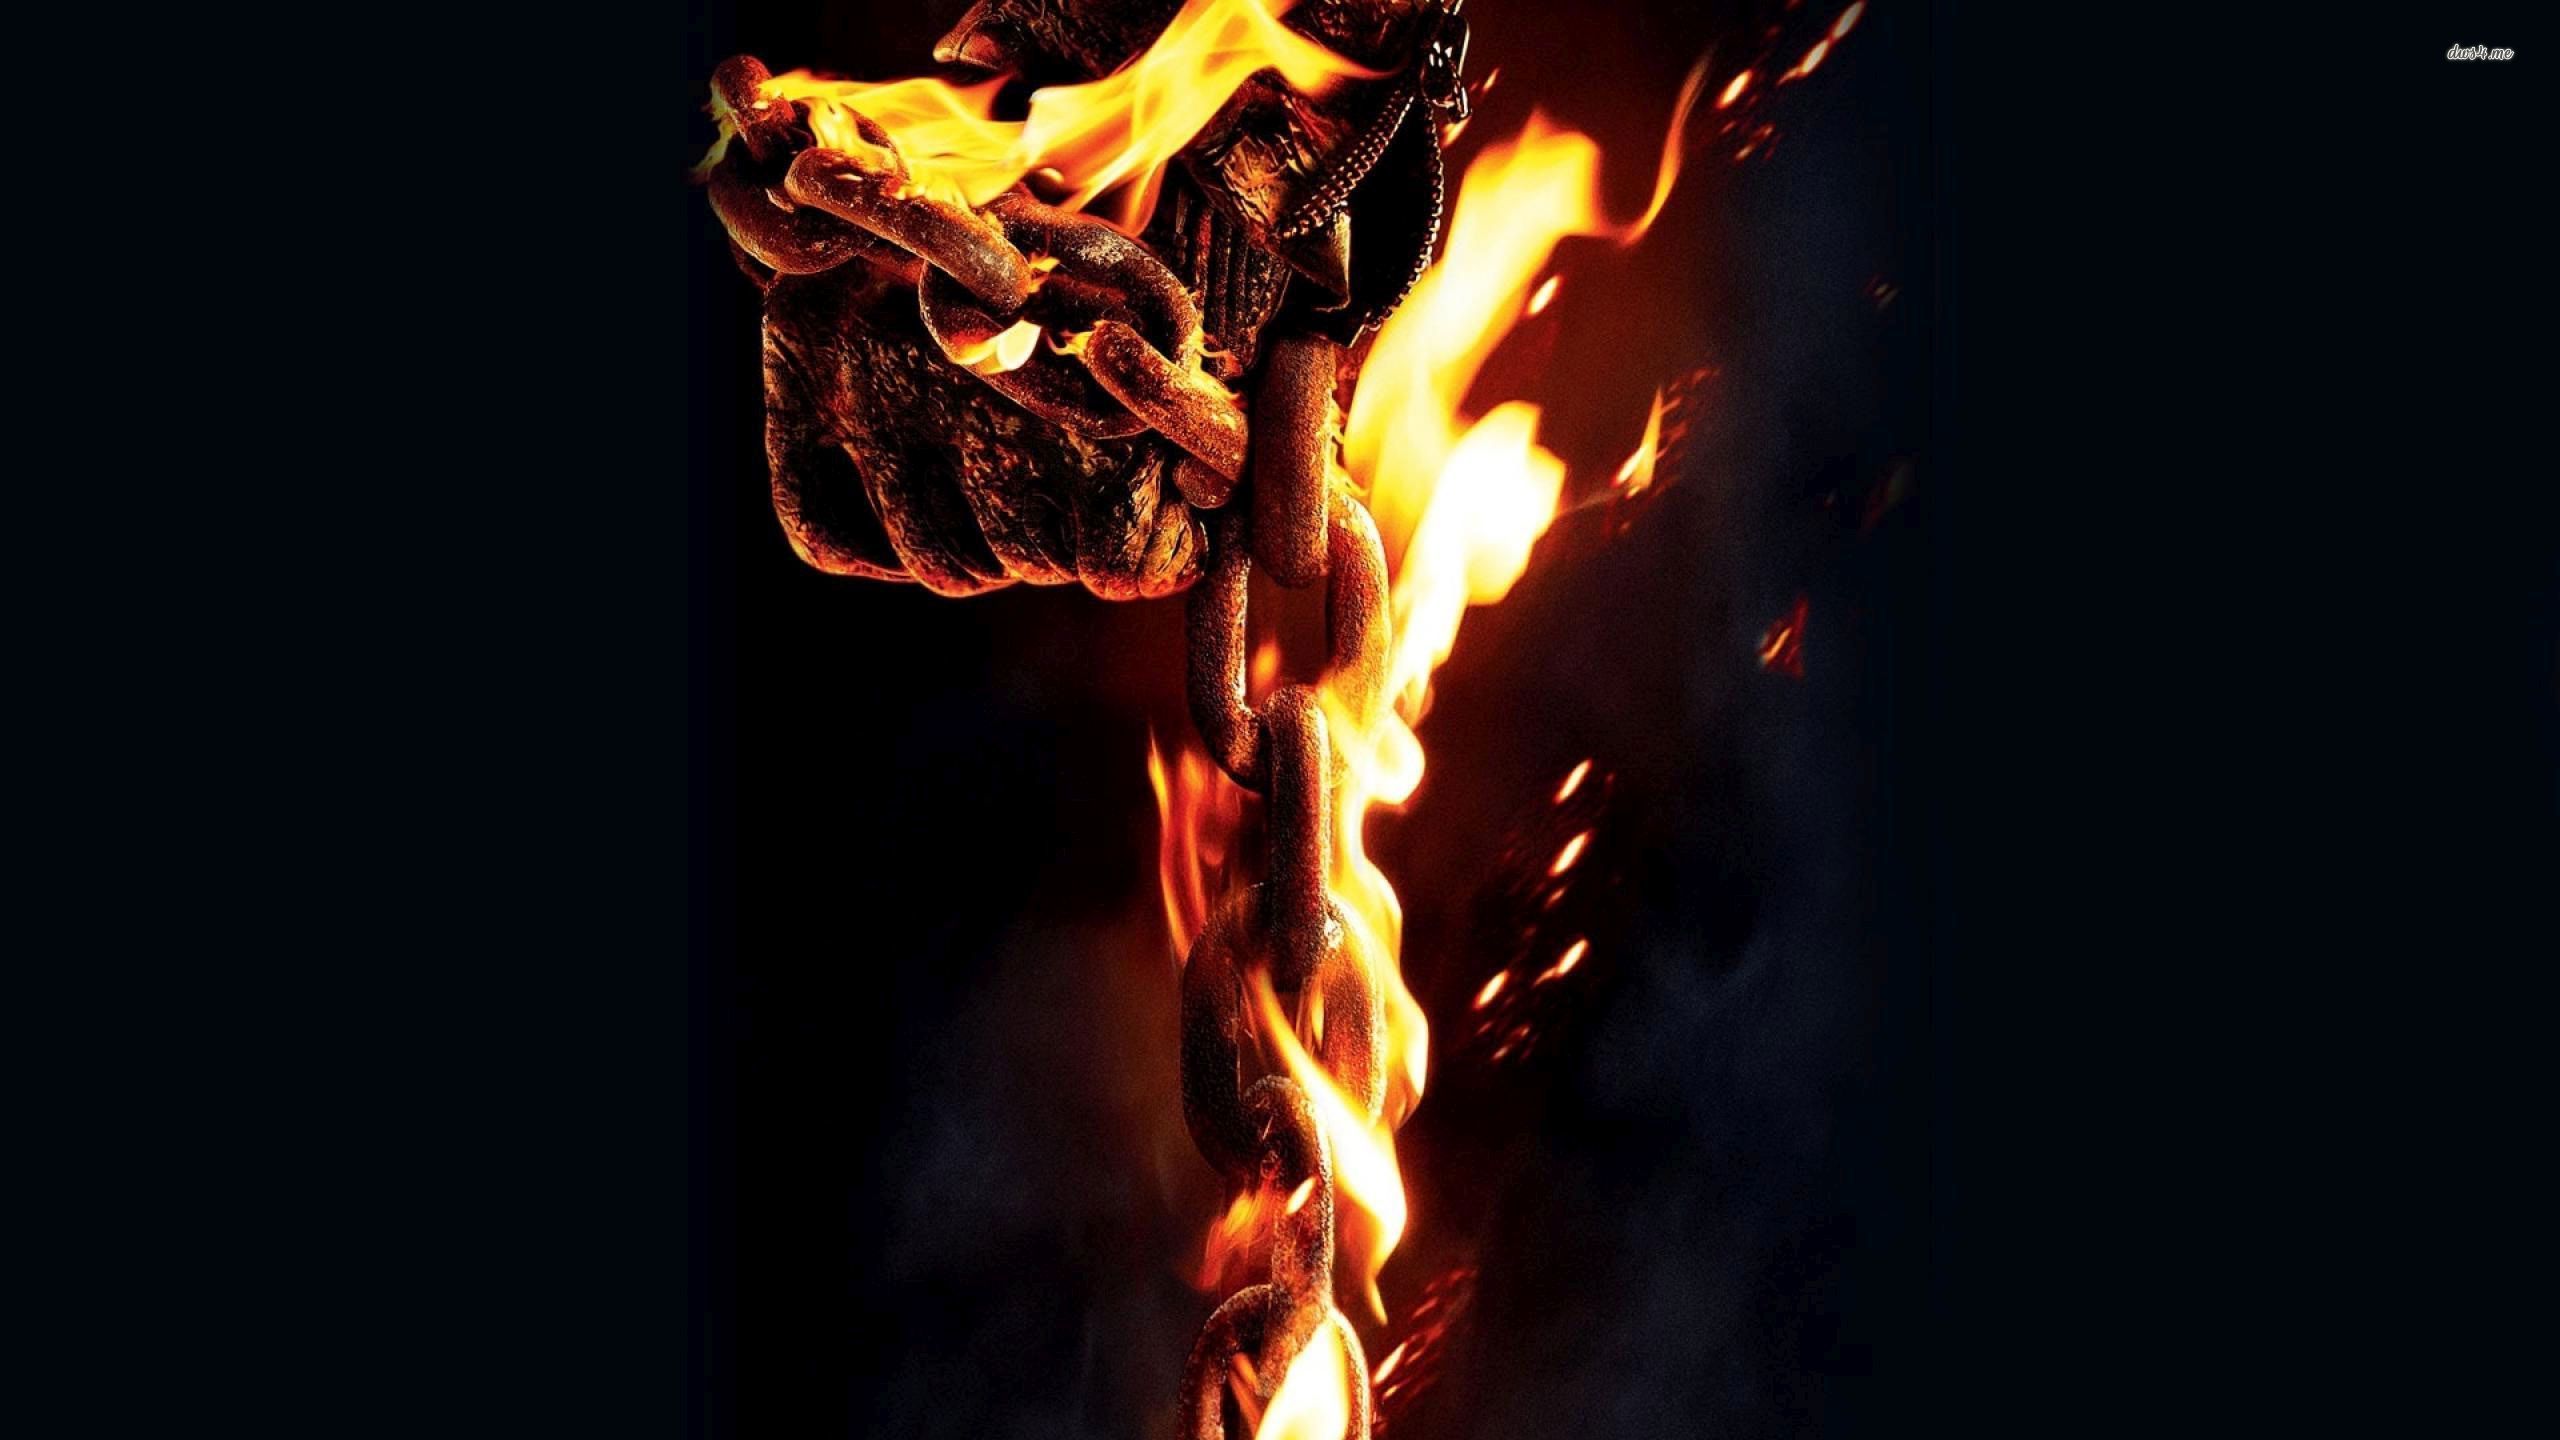 Ghost Rider wallpaper - Movie wallpapers